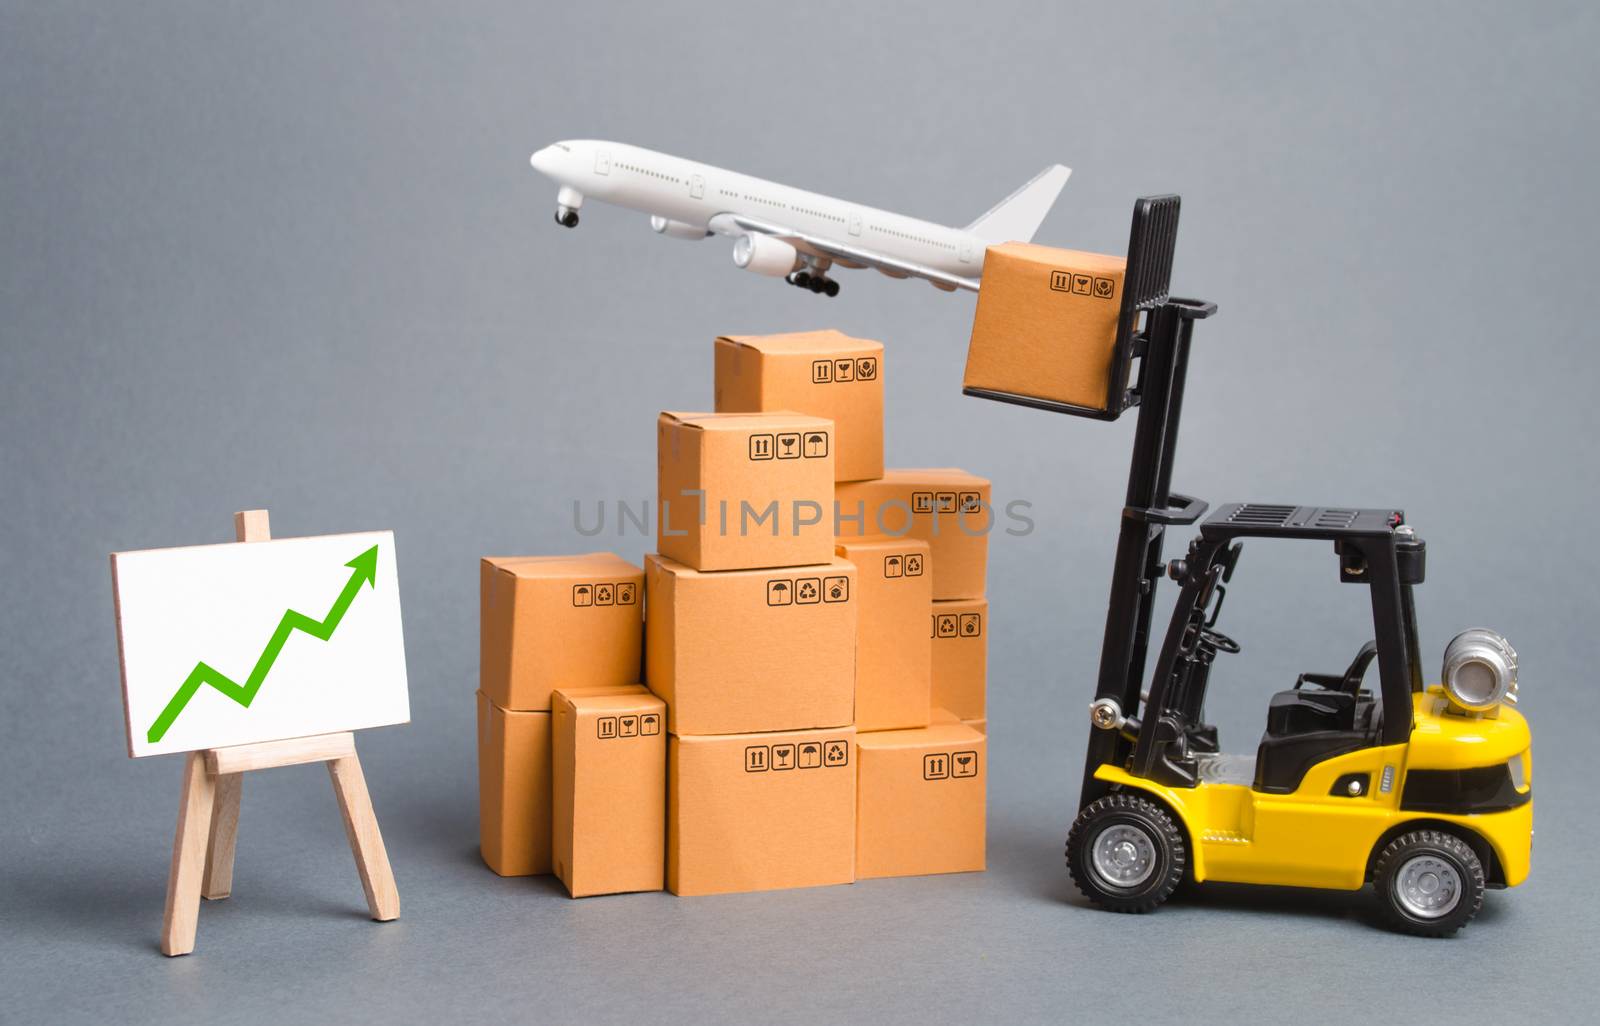 Cargo airplane, forklift truck with cardboard boxes and green arrow up. Increase freight transportation and delivery volumes of products goods. orders growth and throughput of transport infrastructure by iLixe48